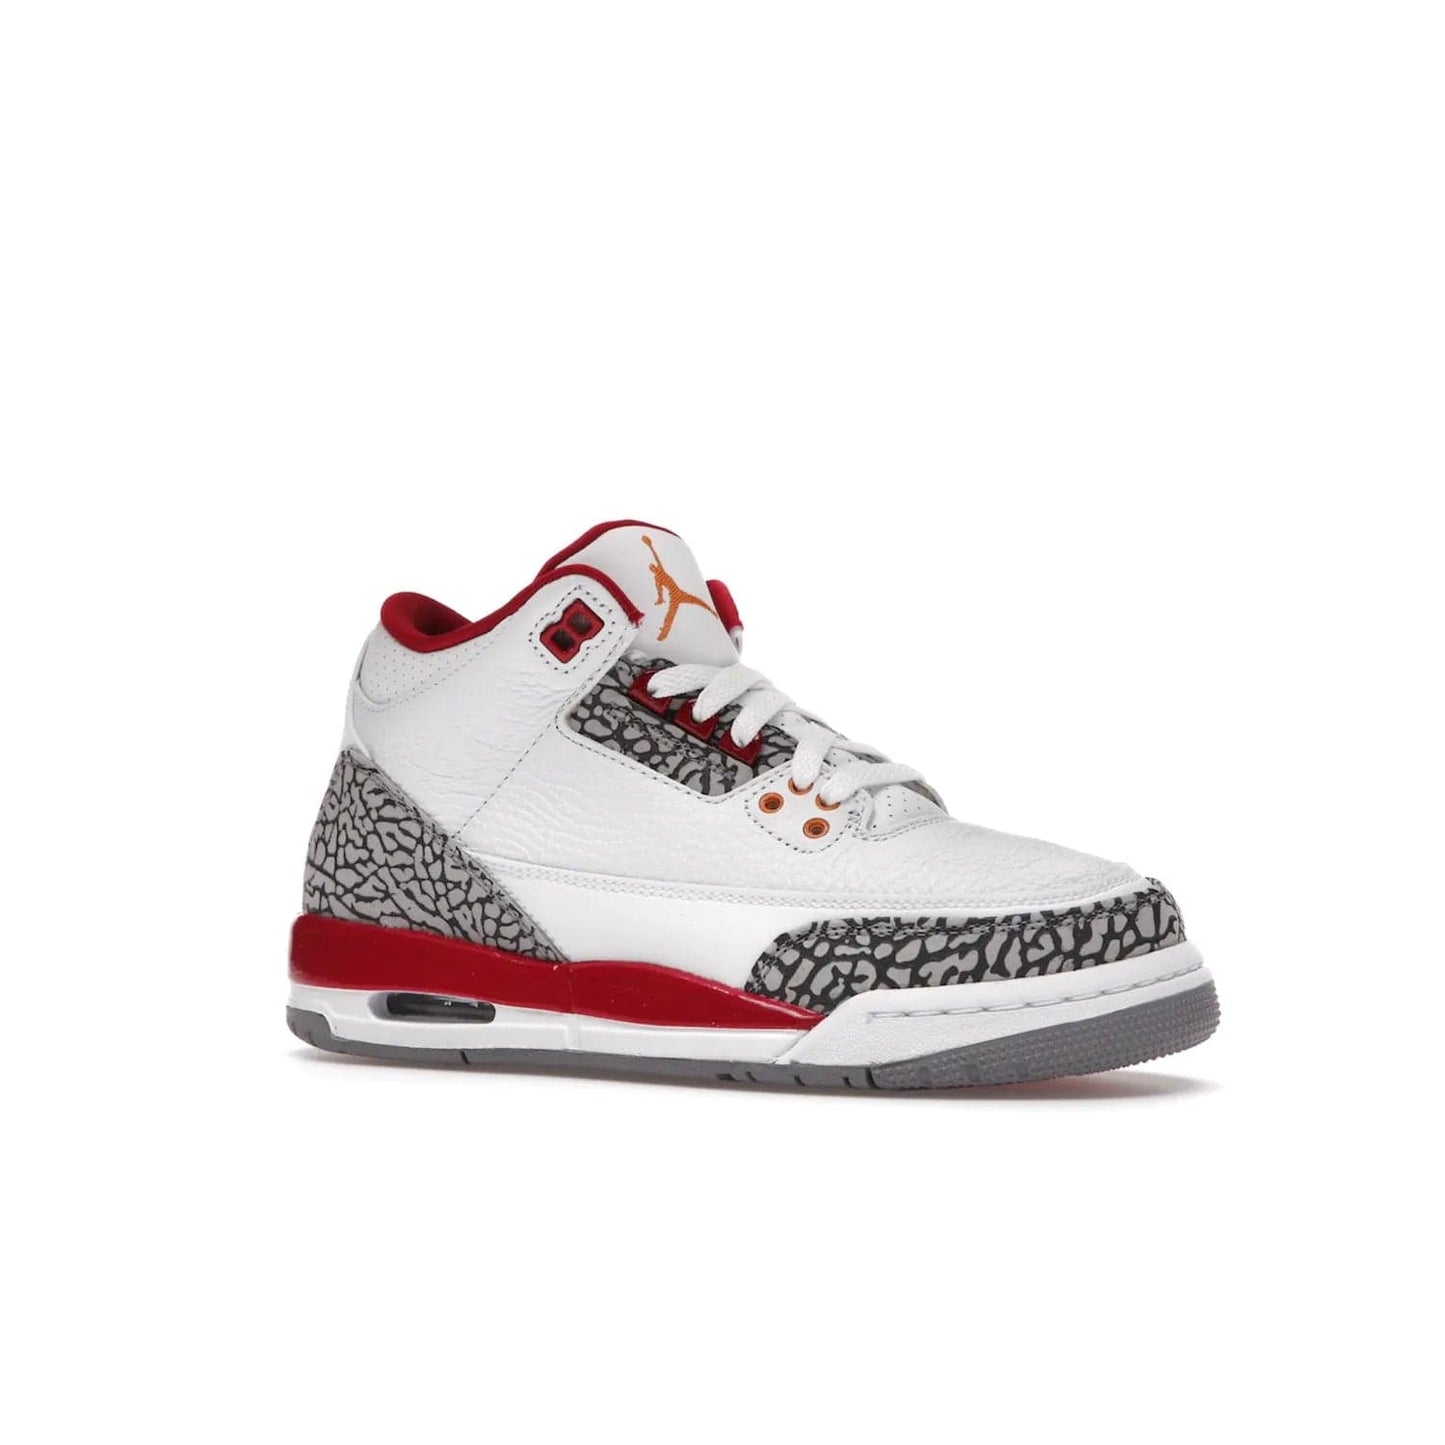 Jordan 3 Retro Cardinal (GS) - Image 4 - Only at www.BallersClubKickz.com - Shop the kid-sized Air Jordan 3 Retro Cardinal GS, released Feb 2022. White tumbled leather upper, light curry accenting, cement grey and classic red details throughout. Visible Air cushioning, midsole, and an eye-catching outsole. Show off your style with this fashionable streetwear silhouette.